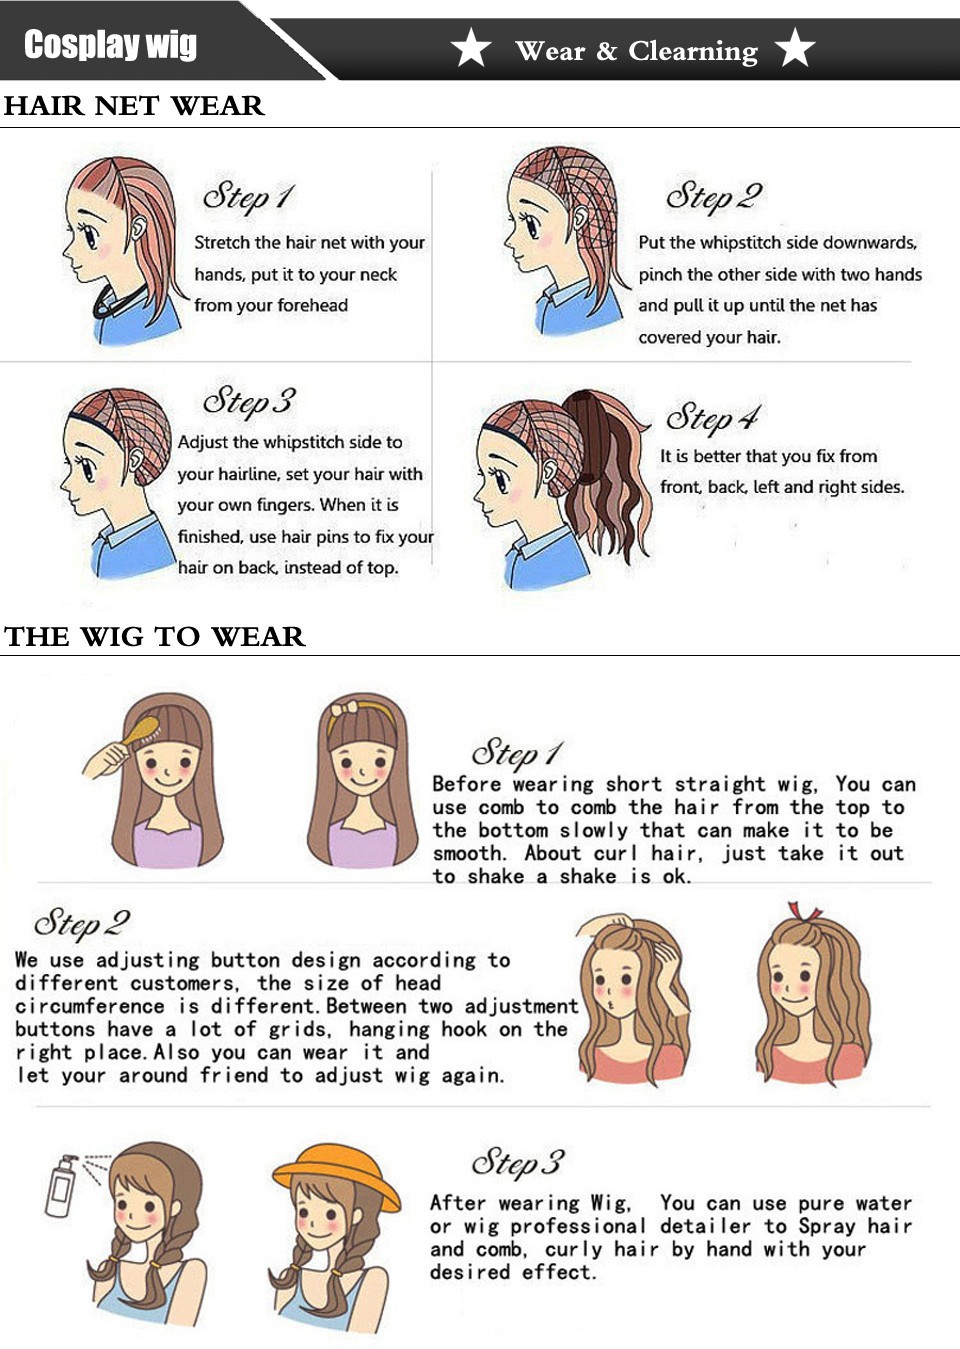 How to wear and clean your cosplay wig？